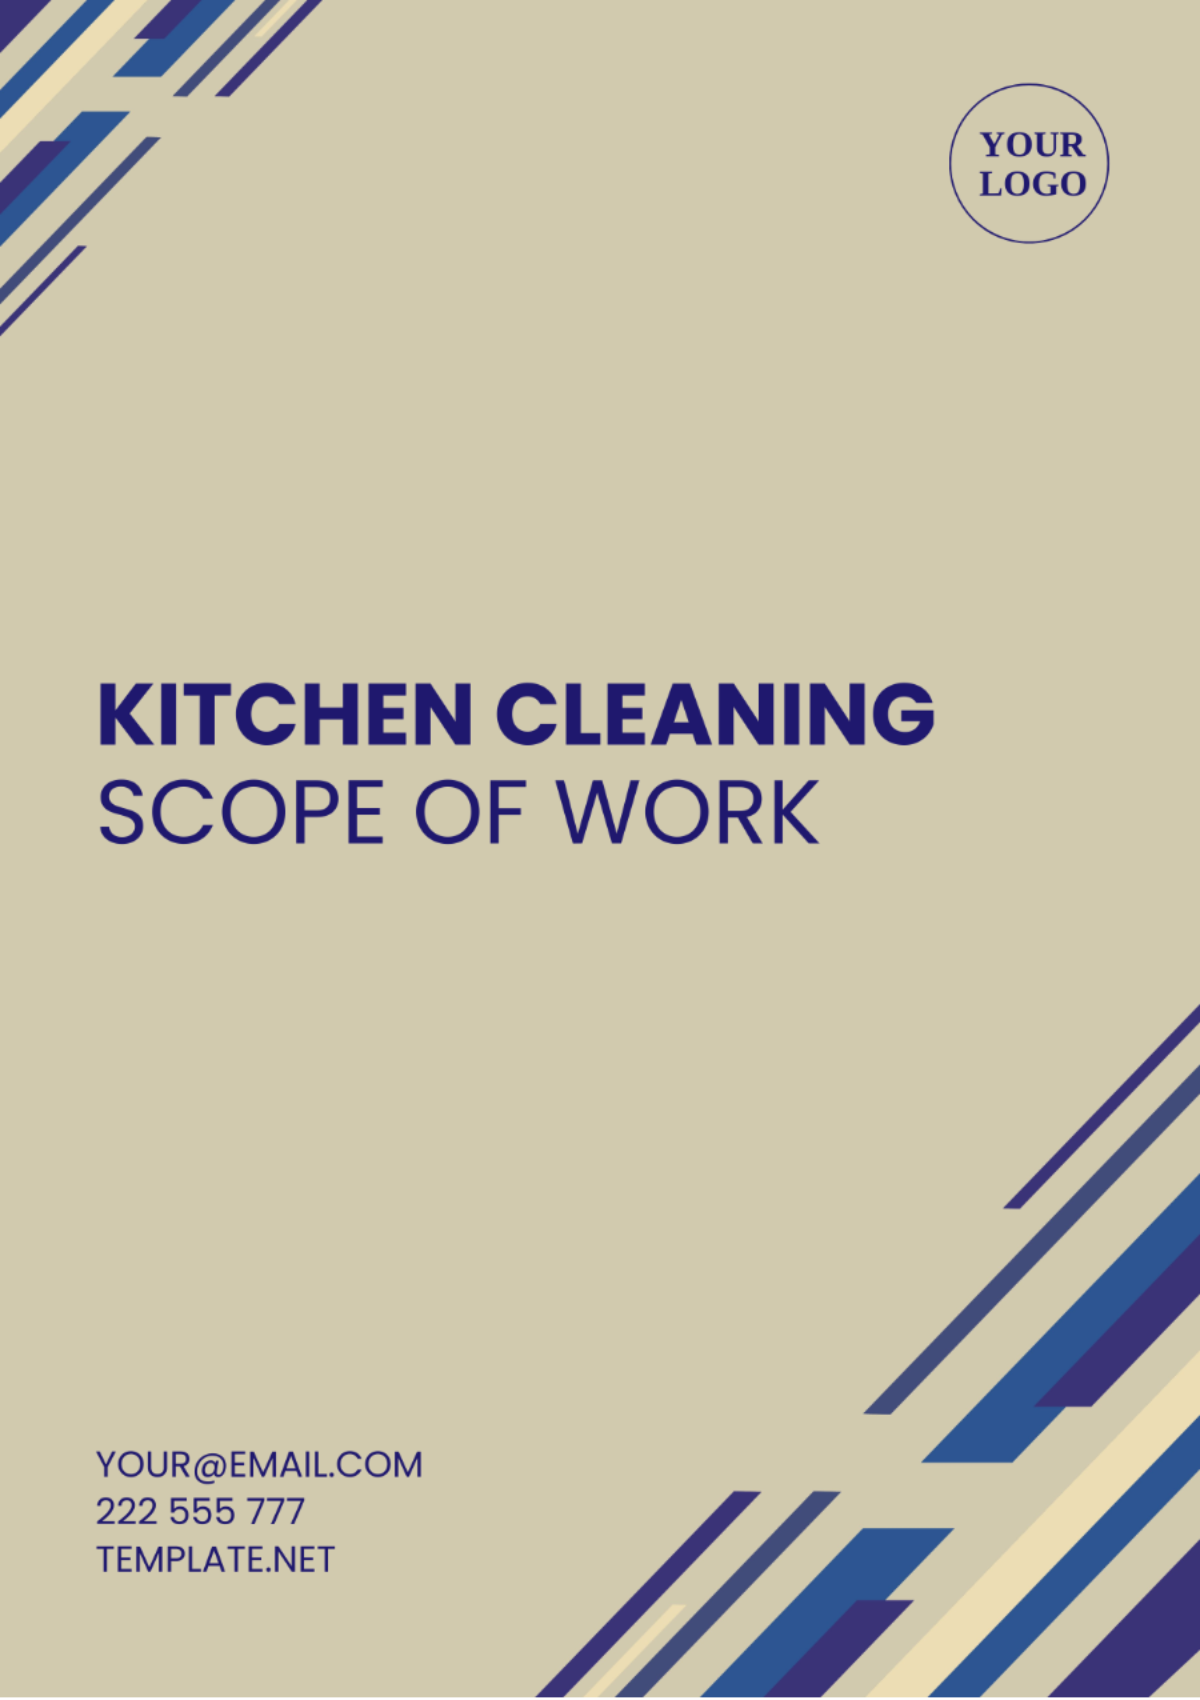 Kitchen Cleaning Scope of Work Template